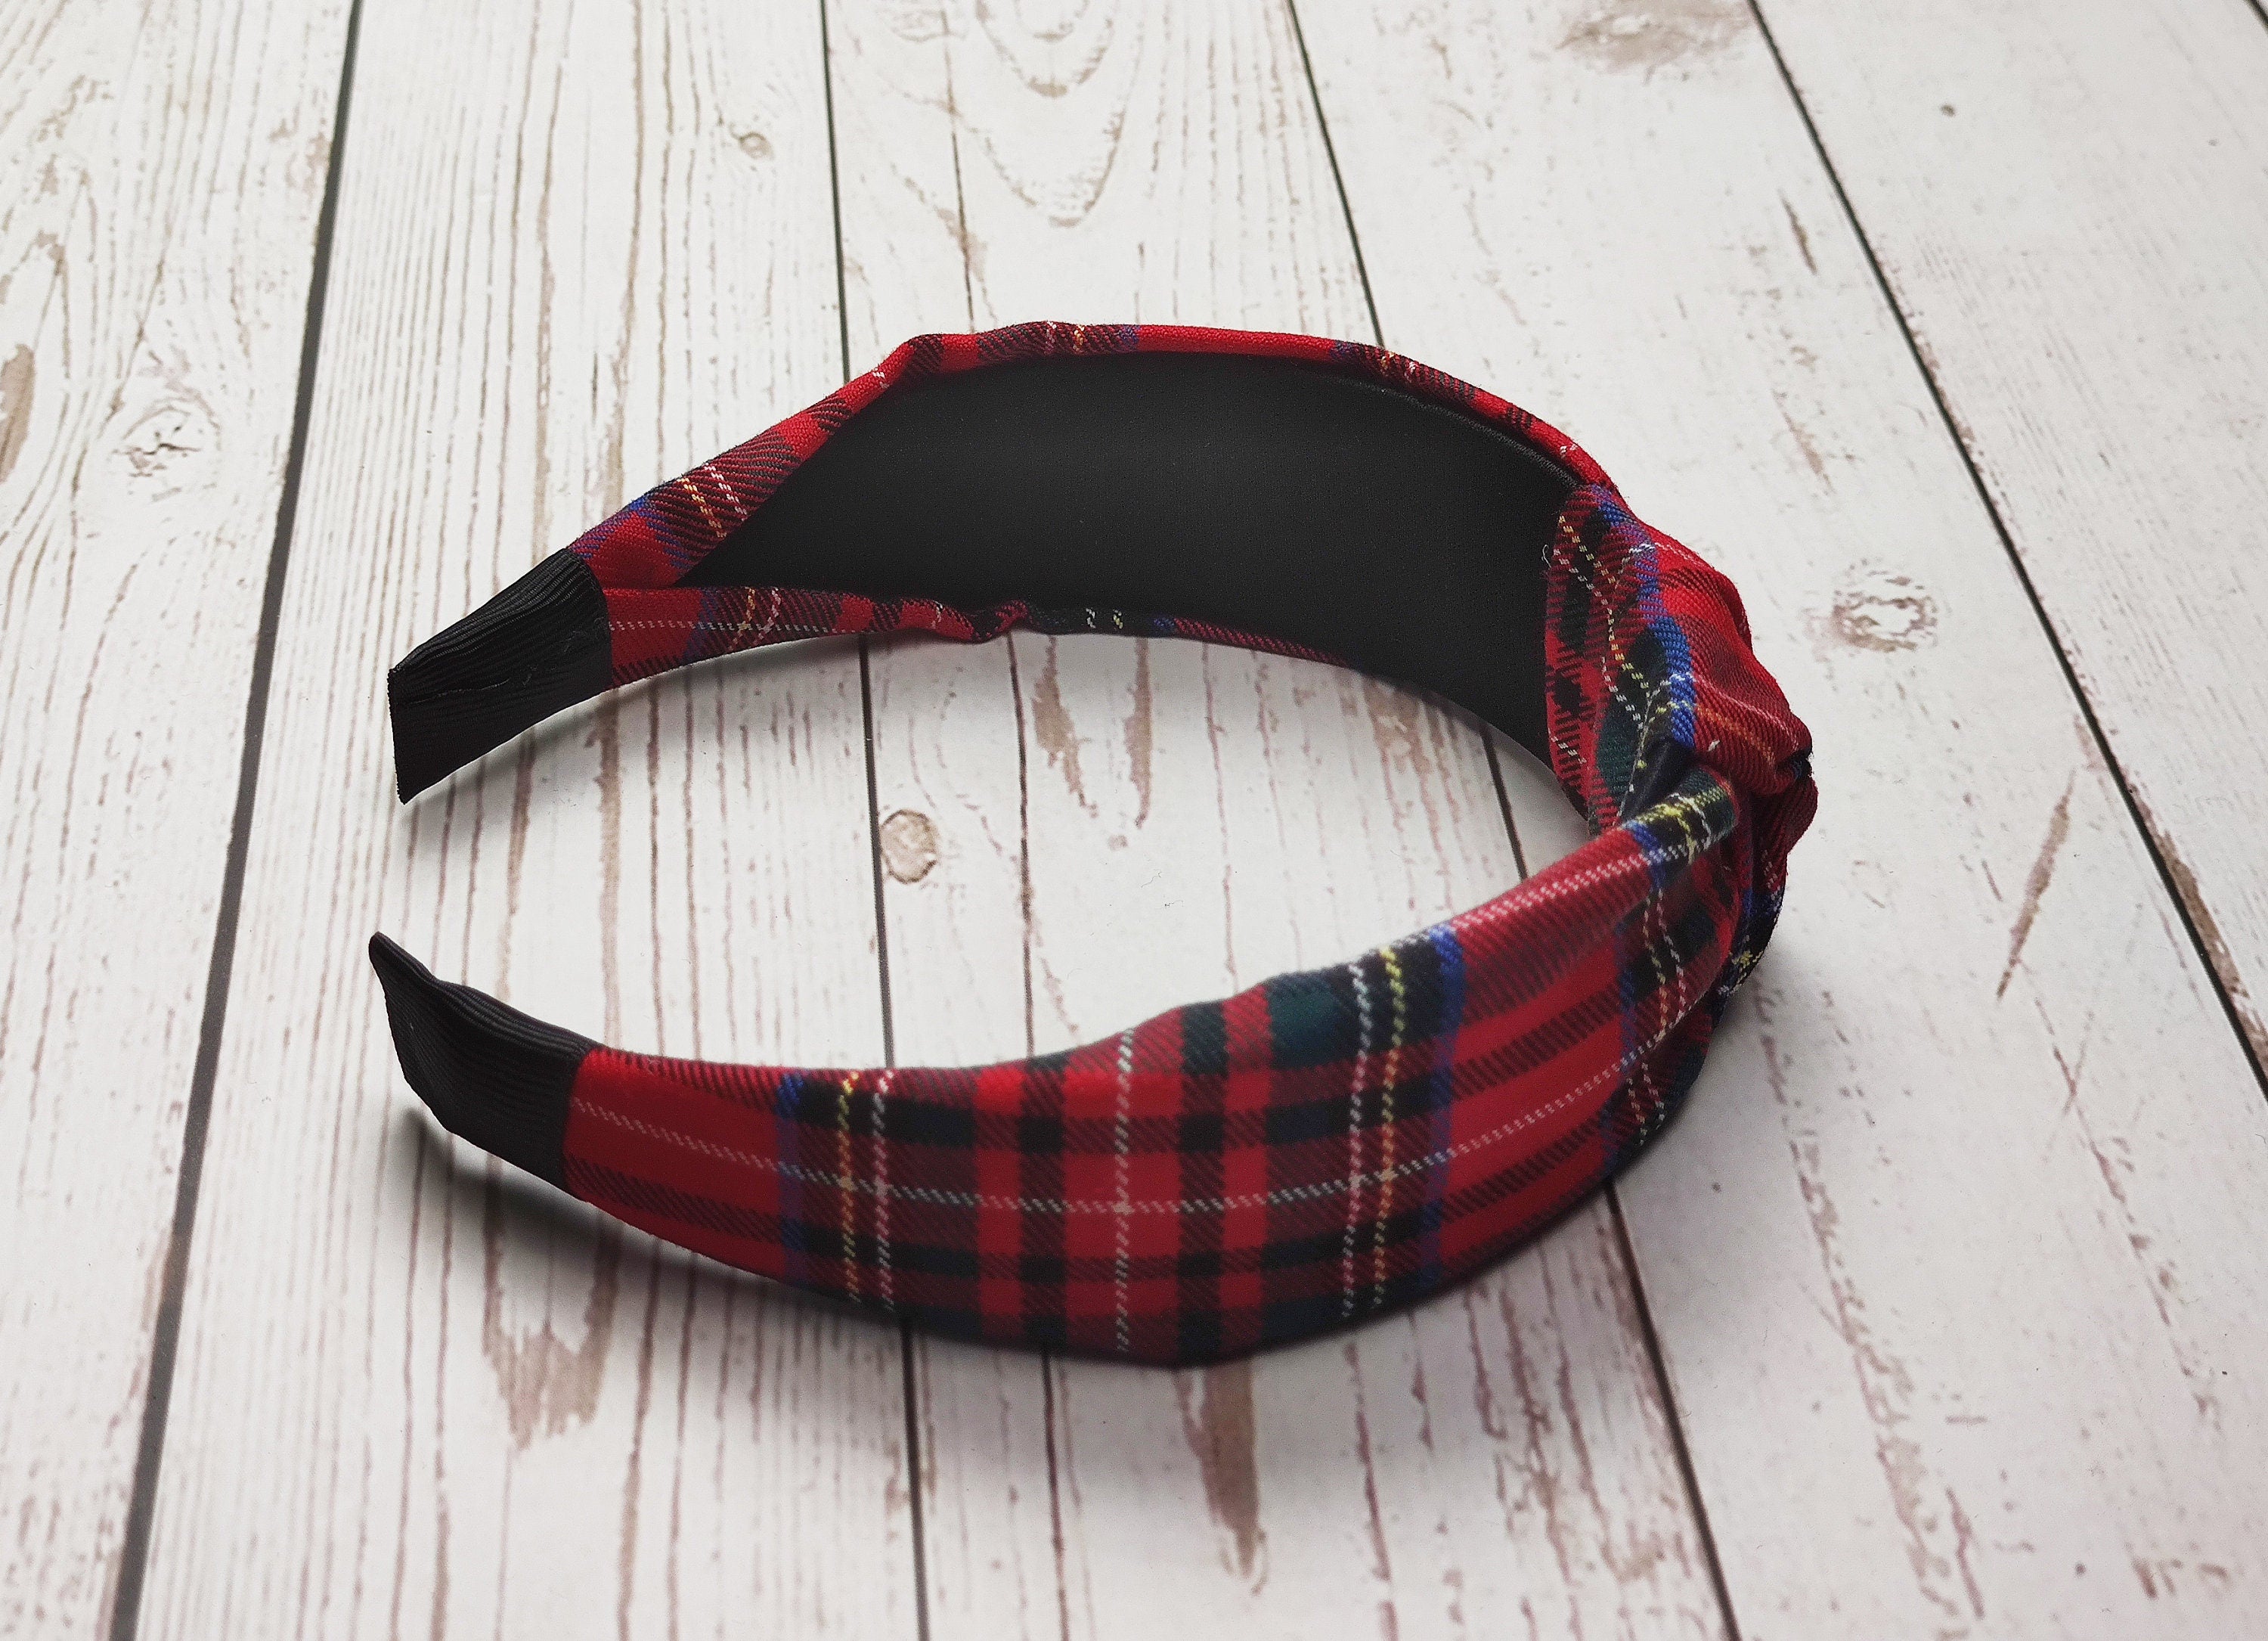 Looking for a funny and fun hair band? Try our plaid pattern Alice band! This headband is perfect for women who love to enjoy their free time wearing something stylish and fun.